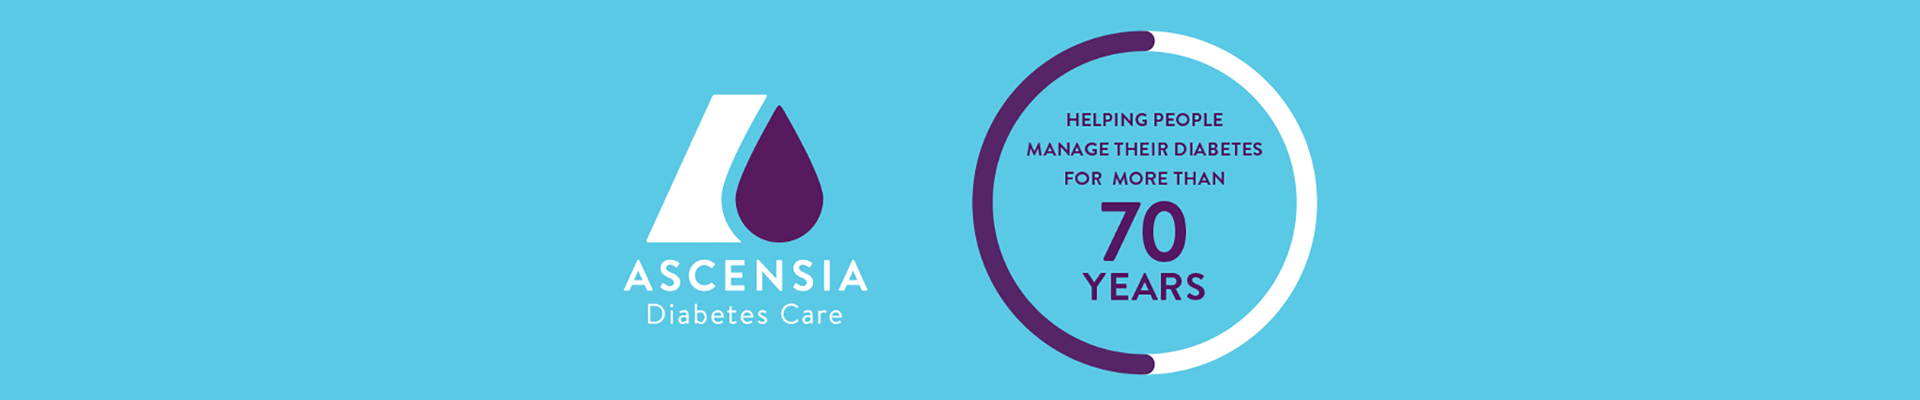 Ascensia Diabetes Care helping people manage their diabetes for more than 70 years 